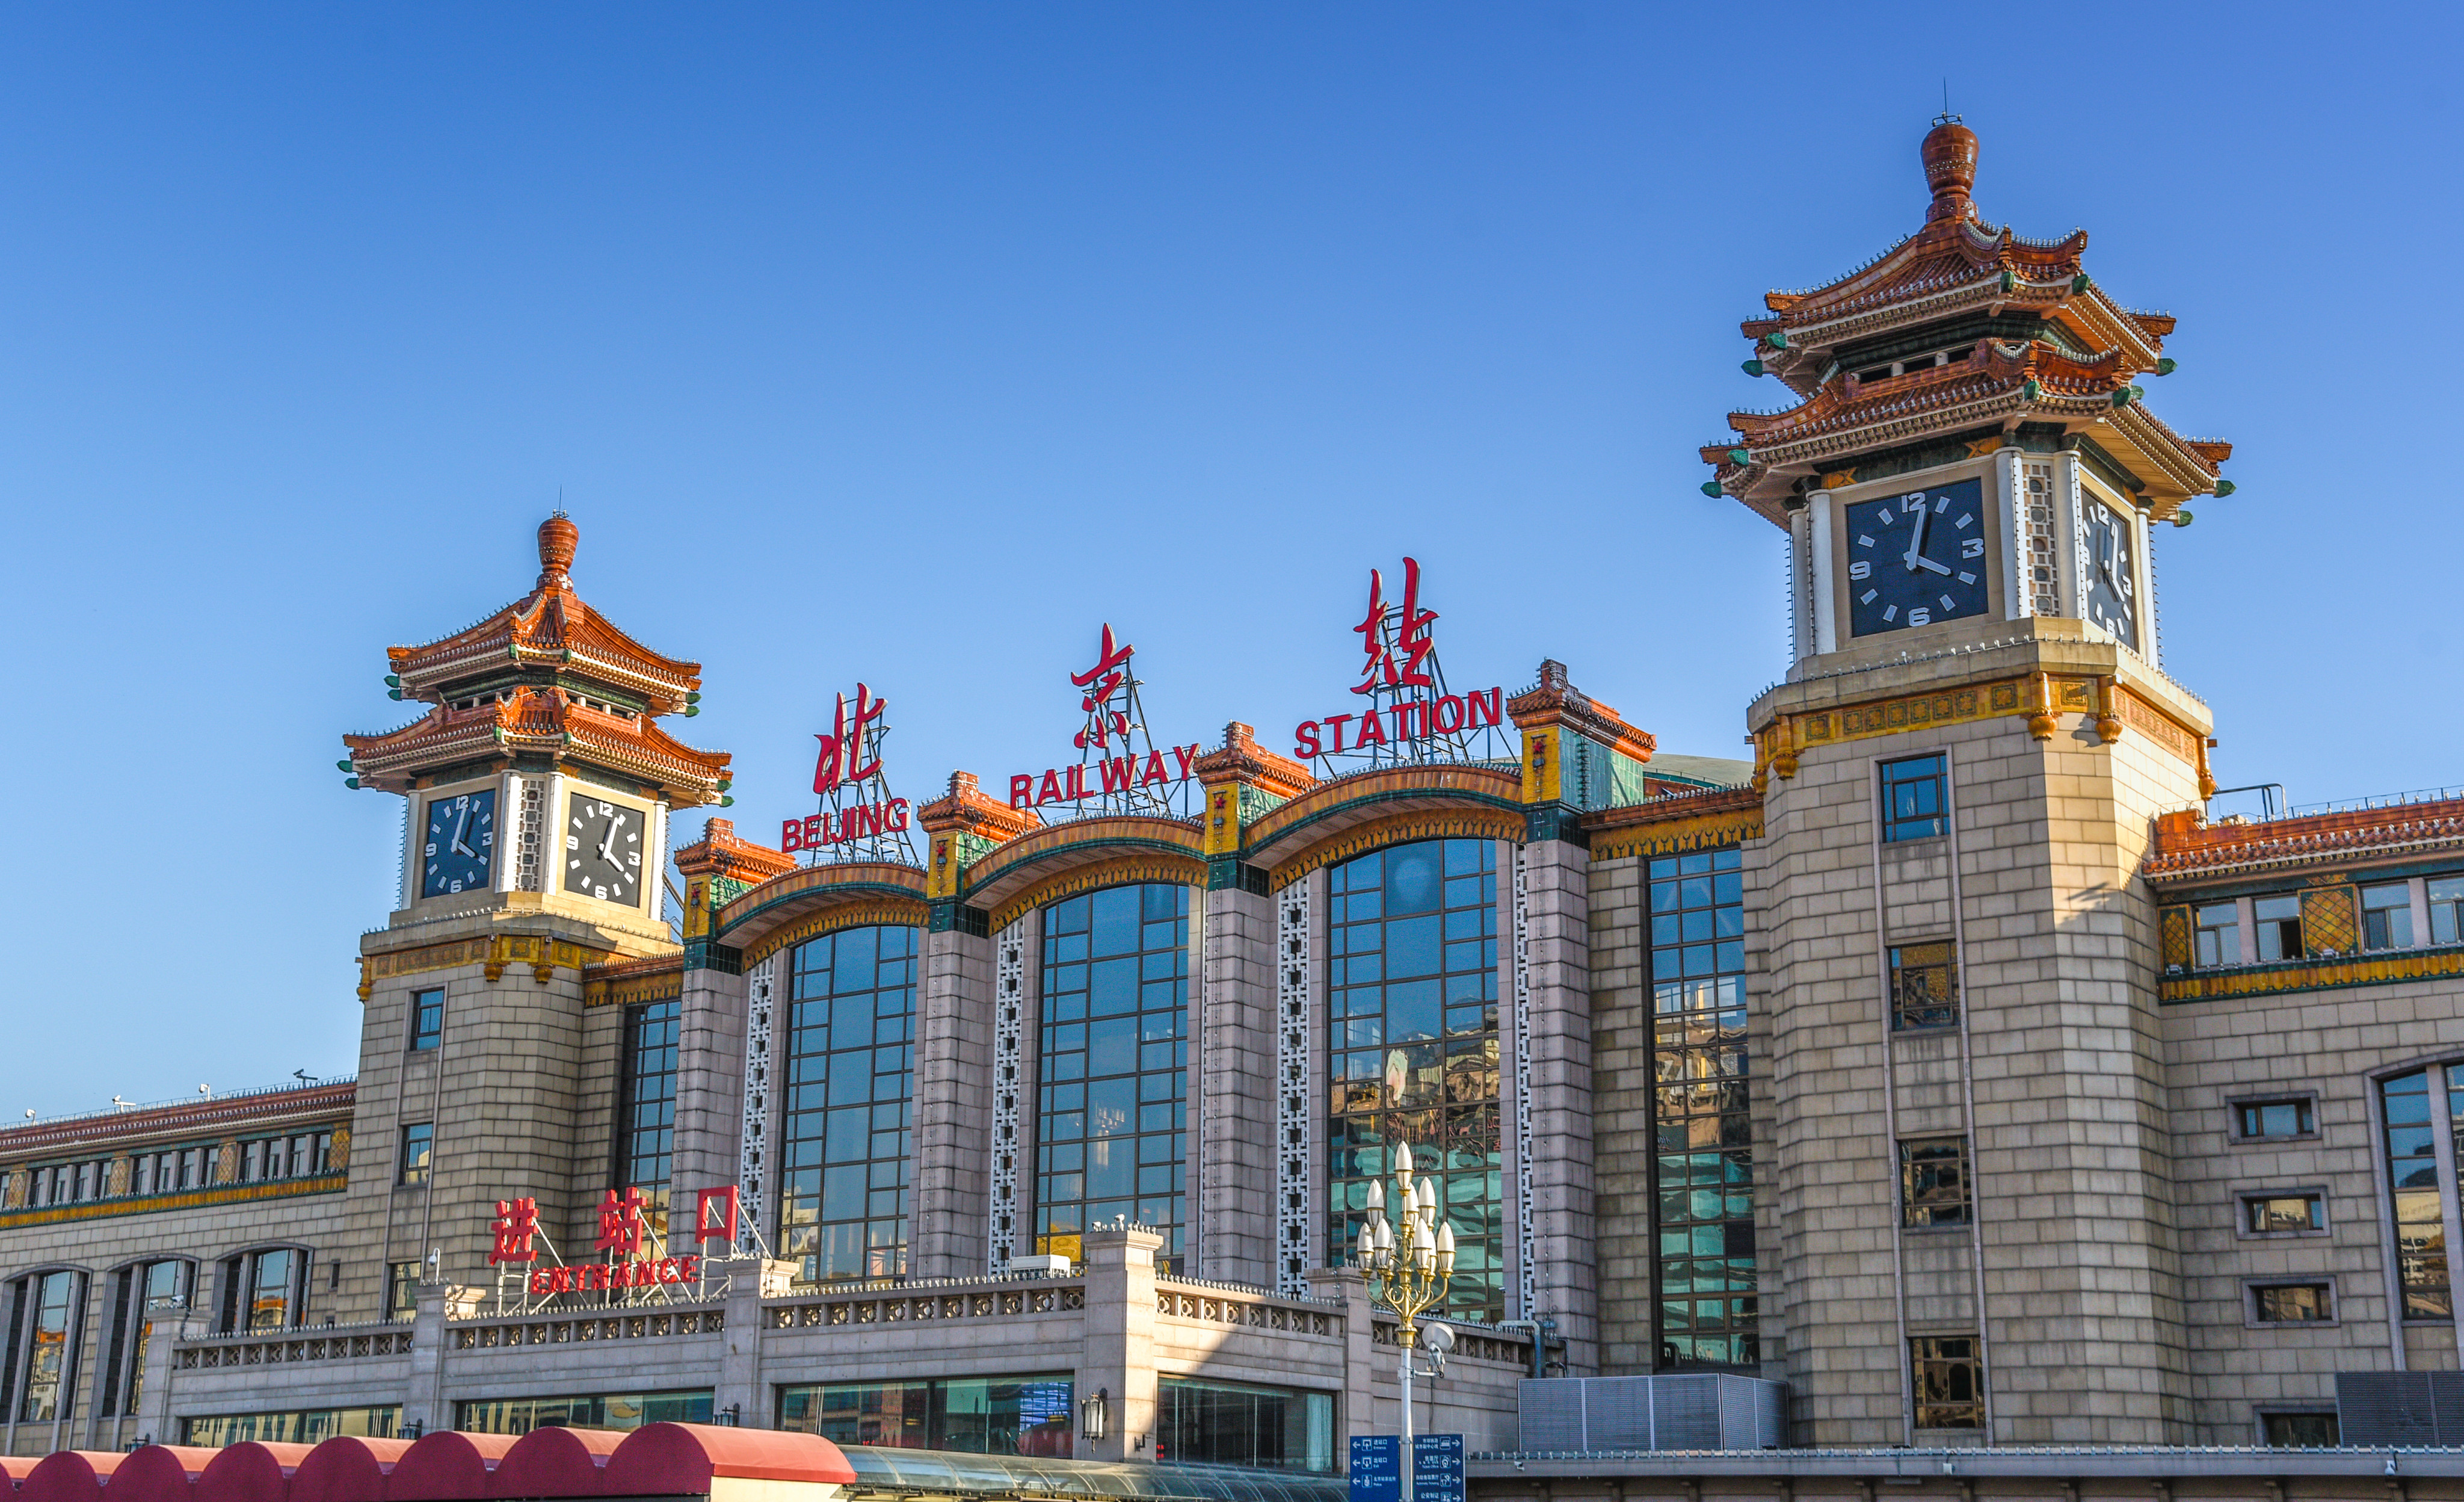 A debate over the Beijing Railway Station’s name has captured the public’s interest. Photo: Shutterstock